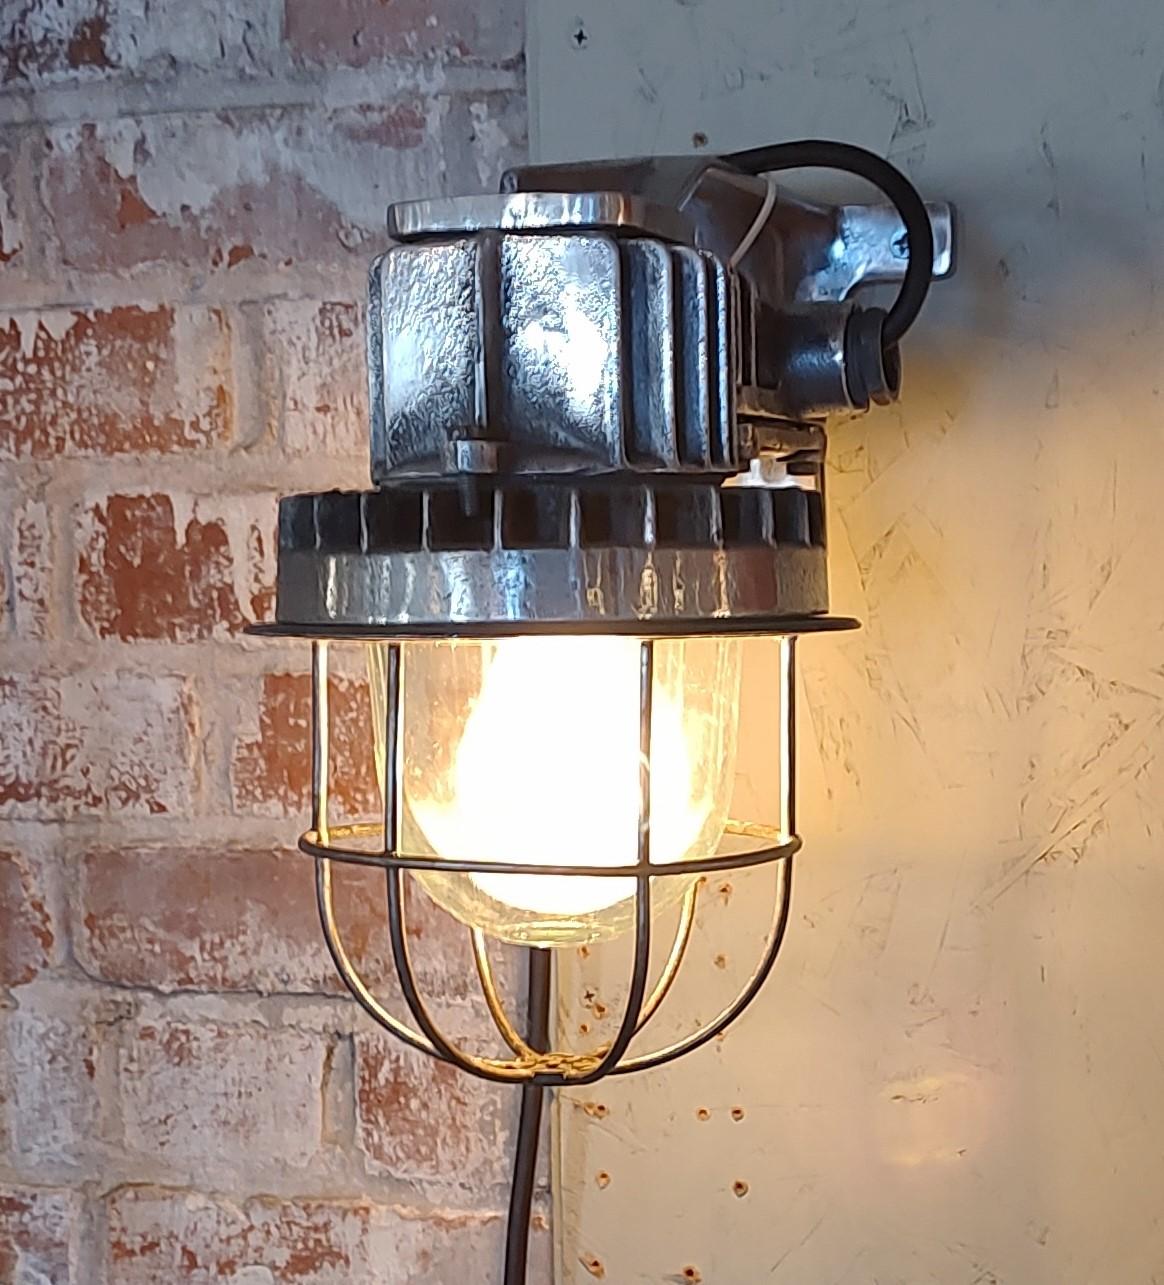 20th Century Vintage Industrial Wall Sconce #1 For Sale